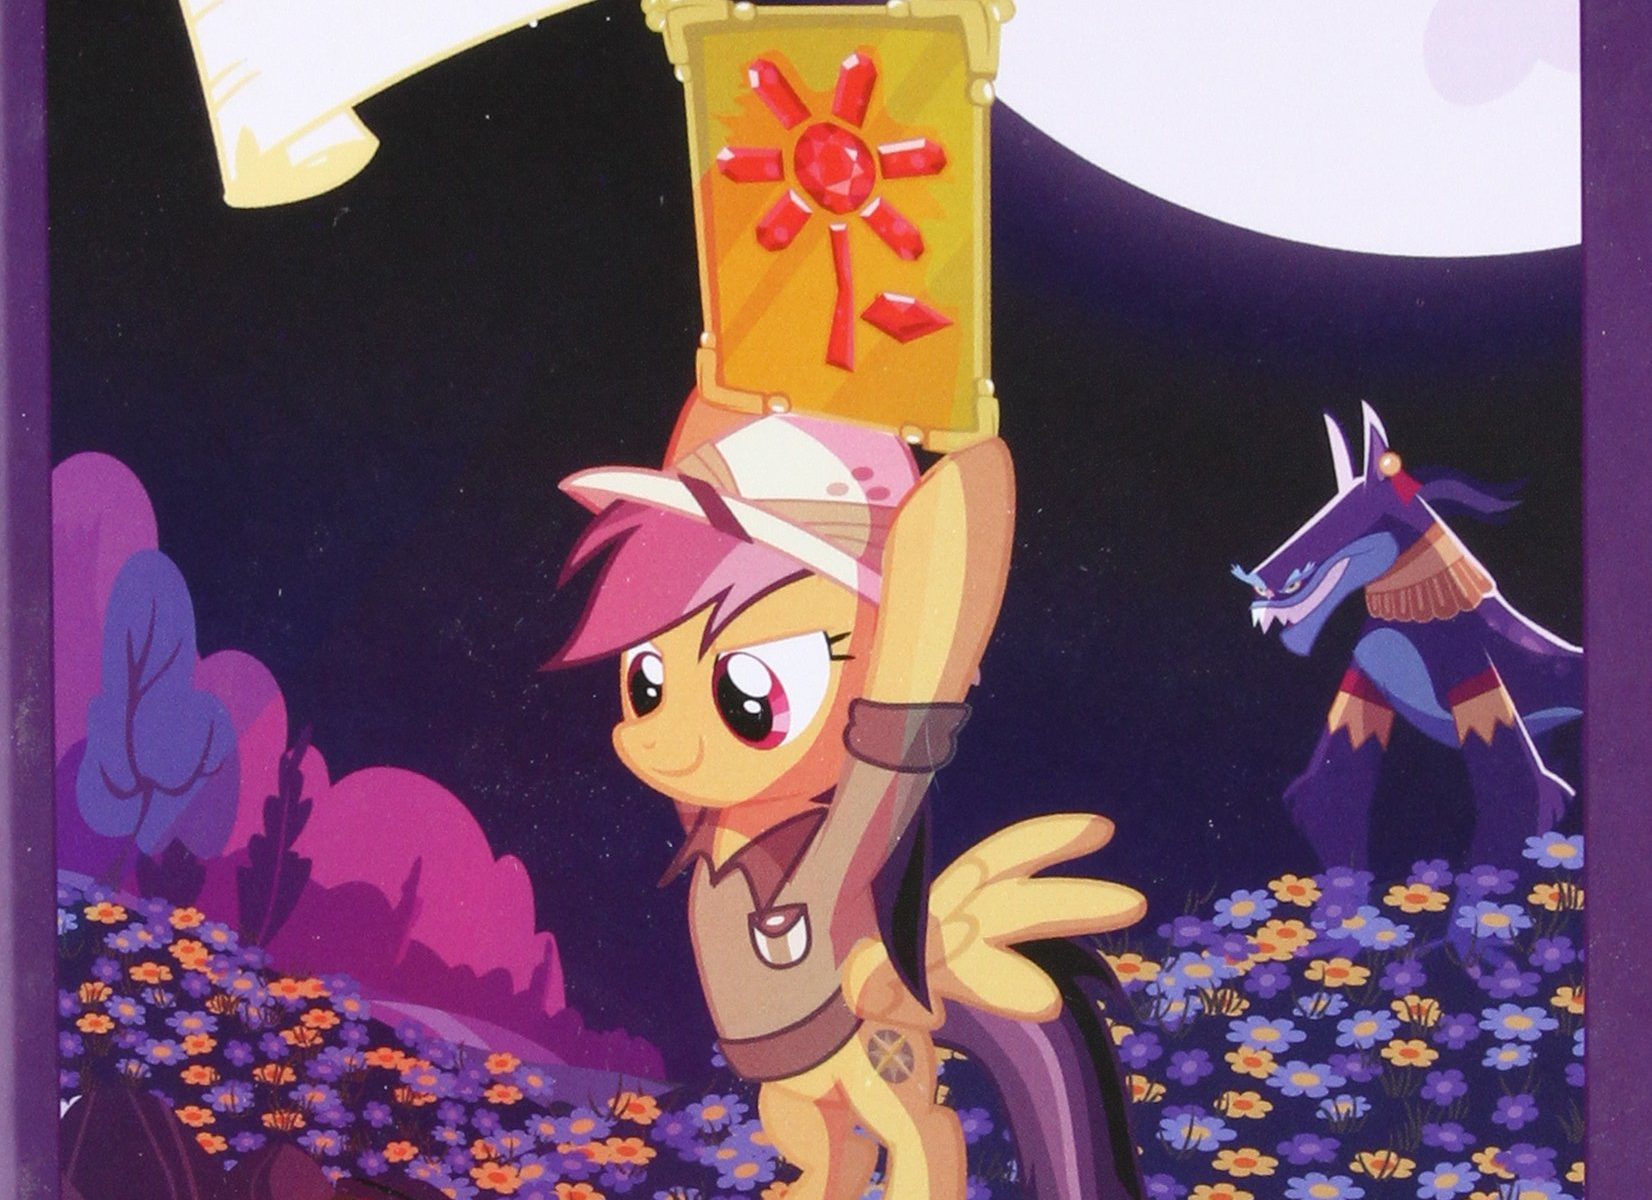 MLP Daring Do and the Eternal Flower Book 1